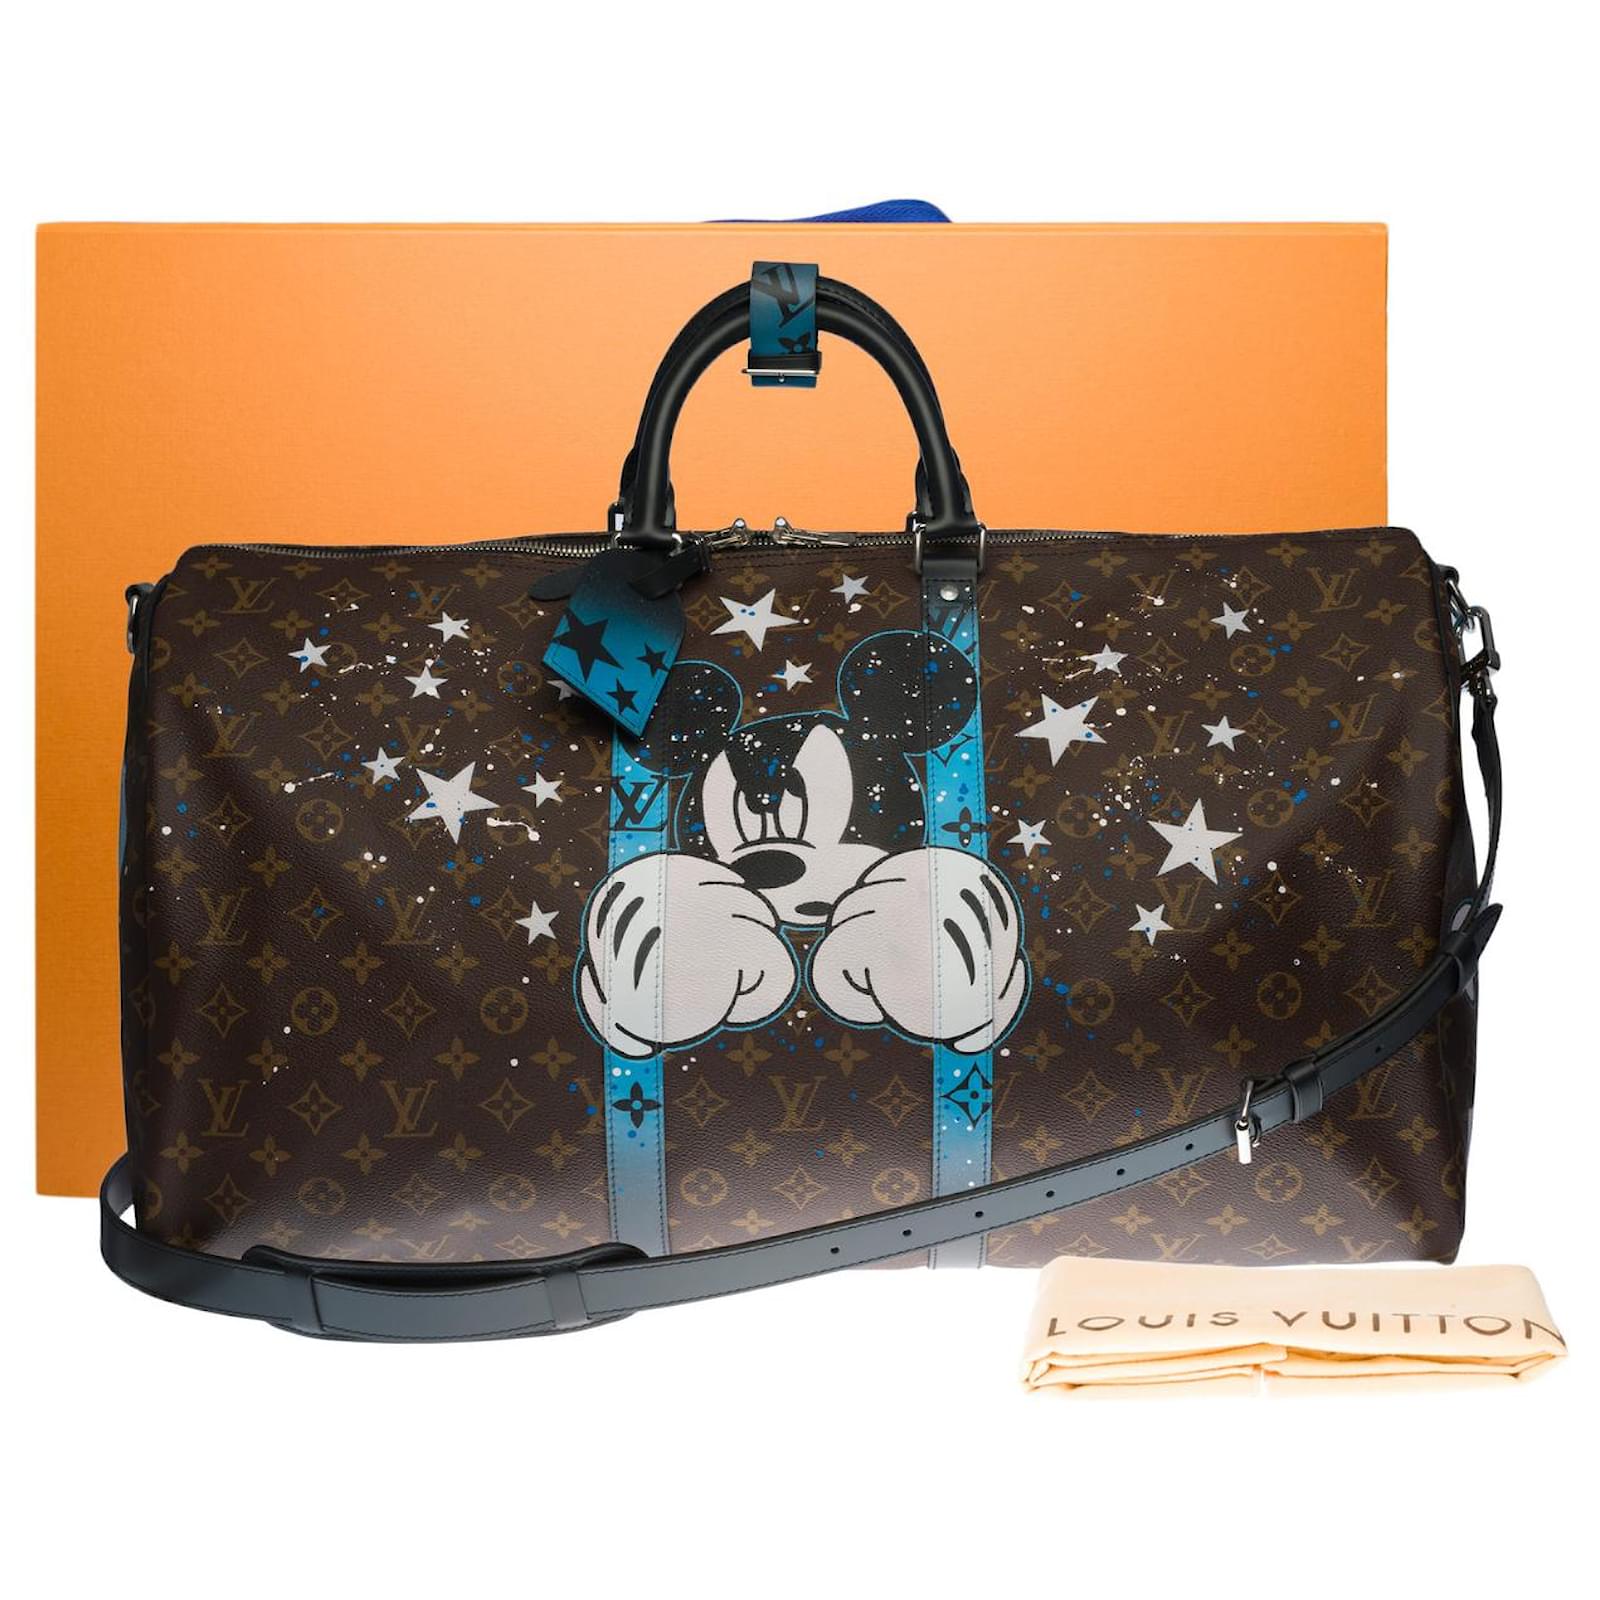 Travel bag Louis Vuitton Keepall 55 customized Be or not to be